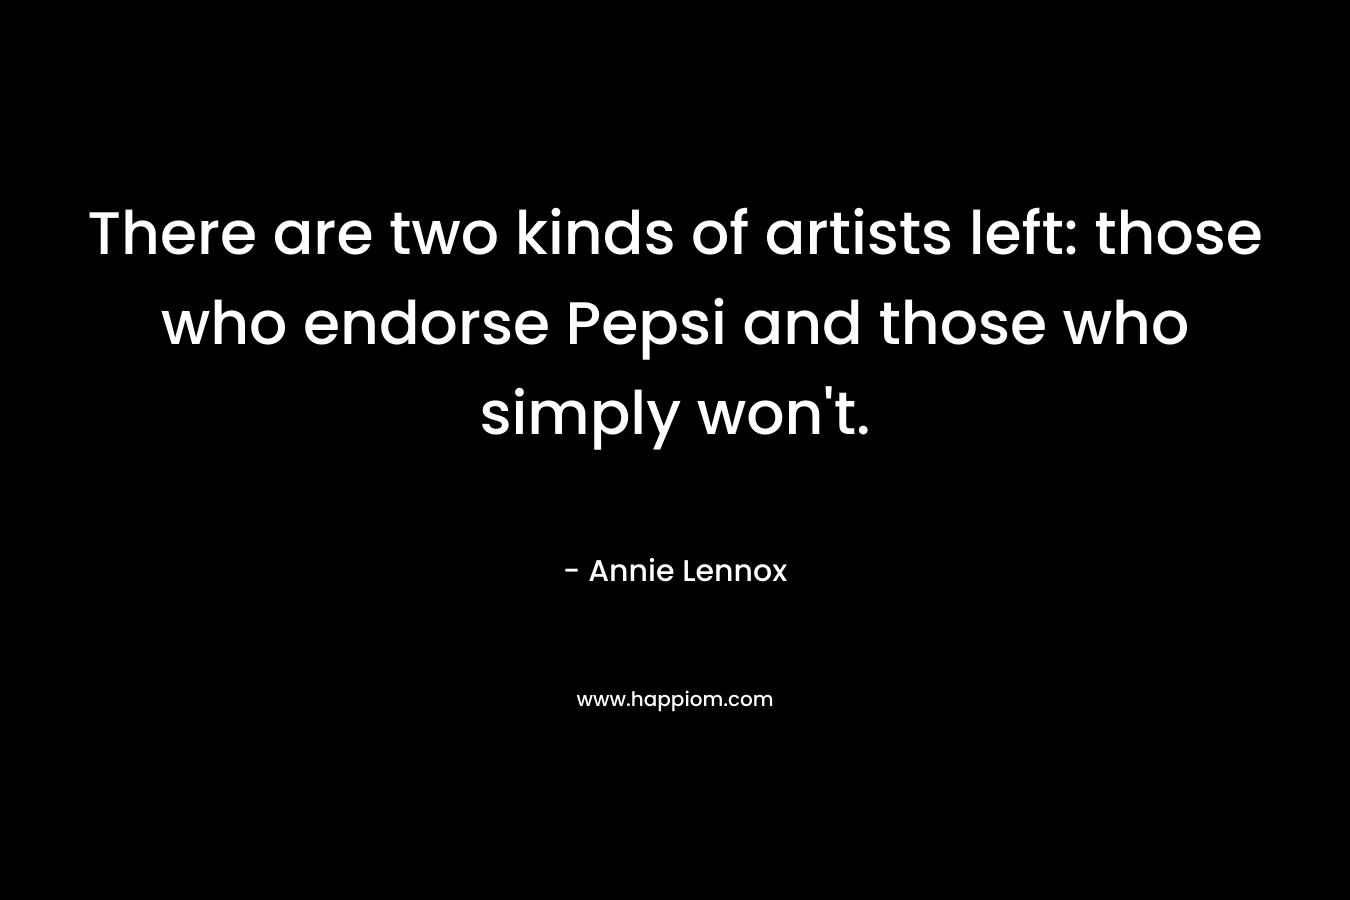 There are two kinds of artists left: those who endorse Pepsi and those who simply won't.